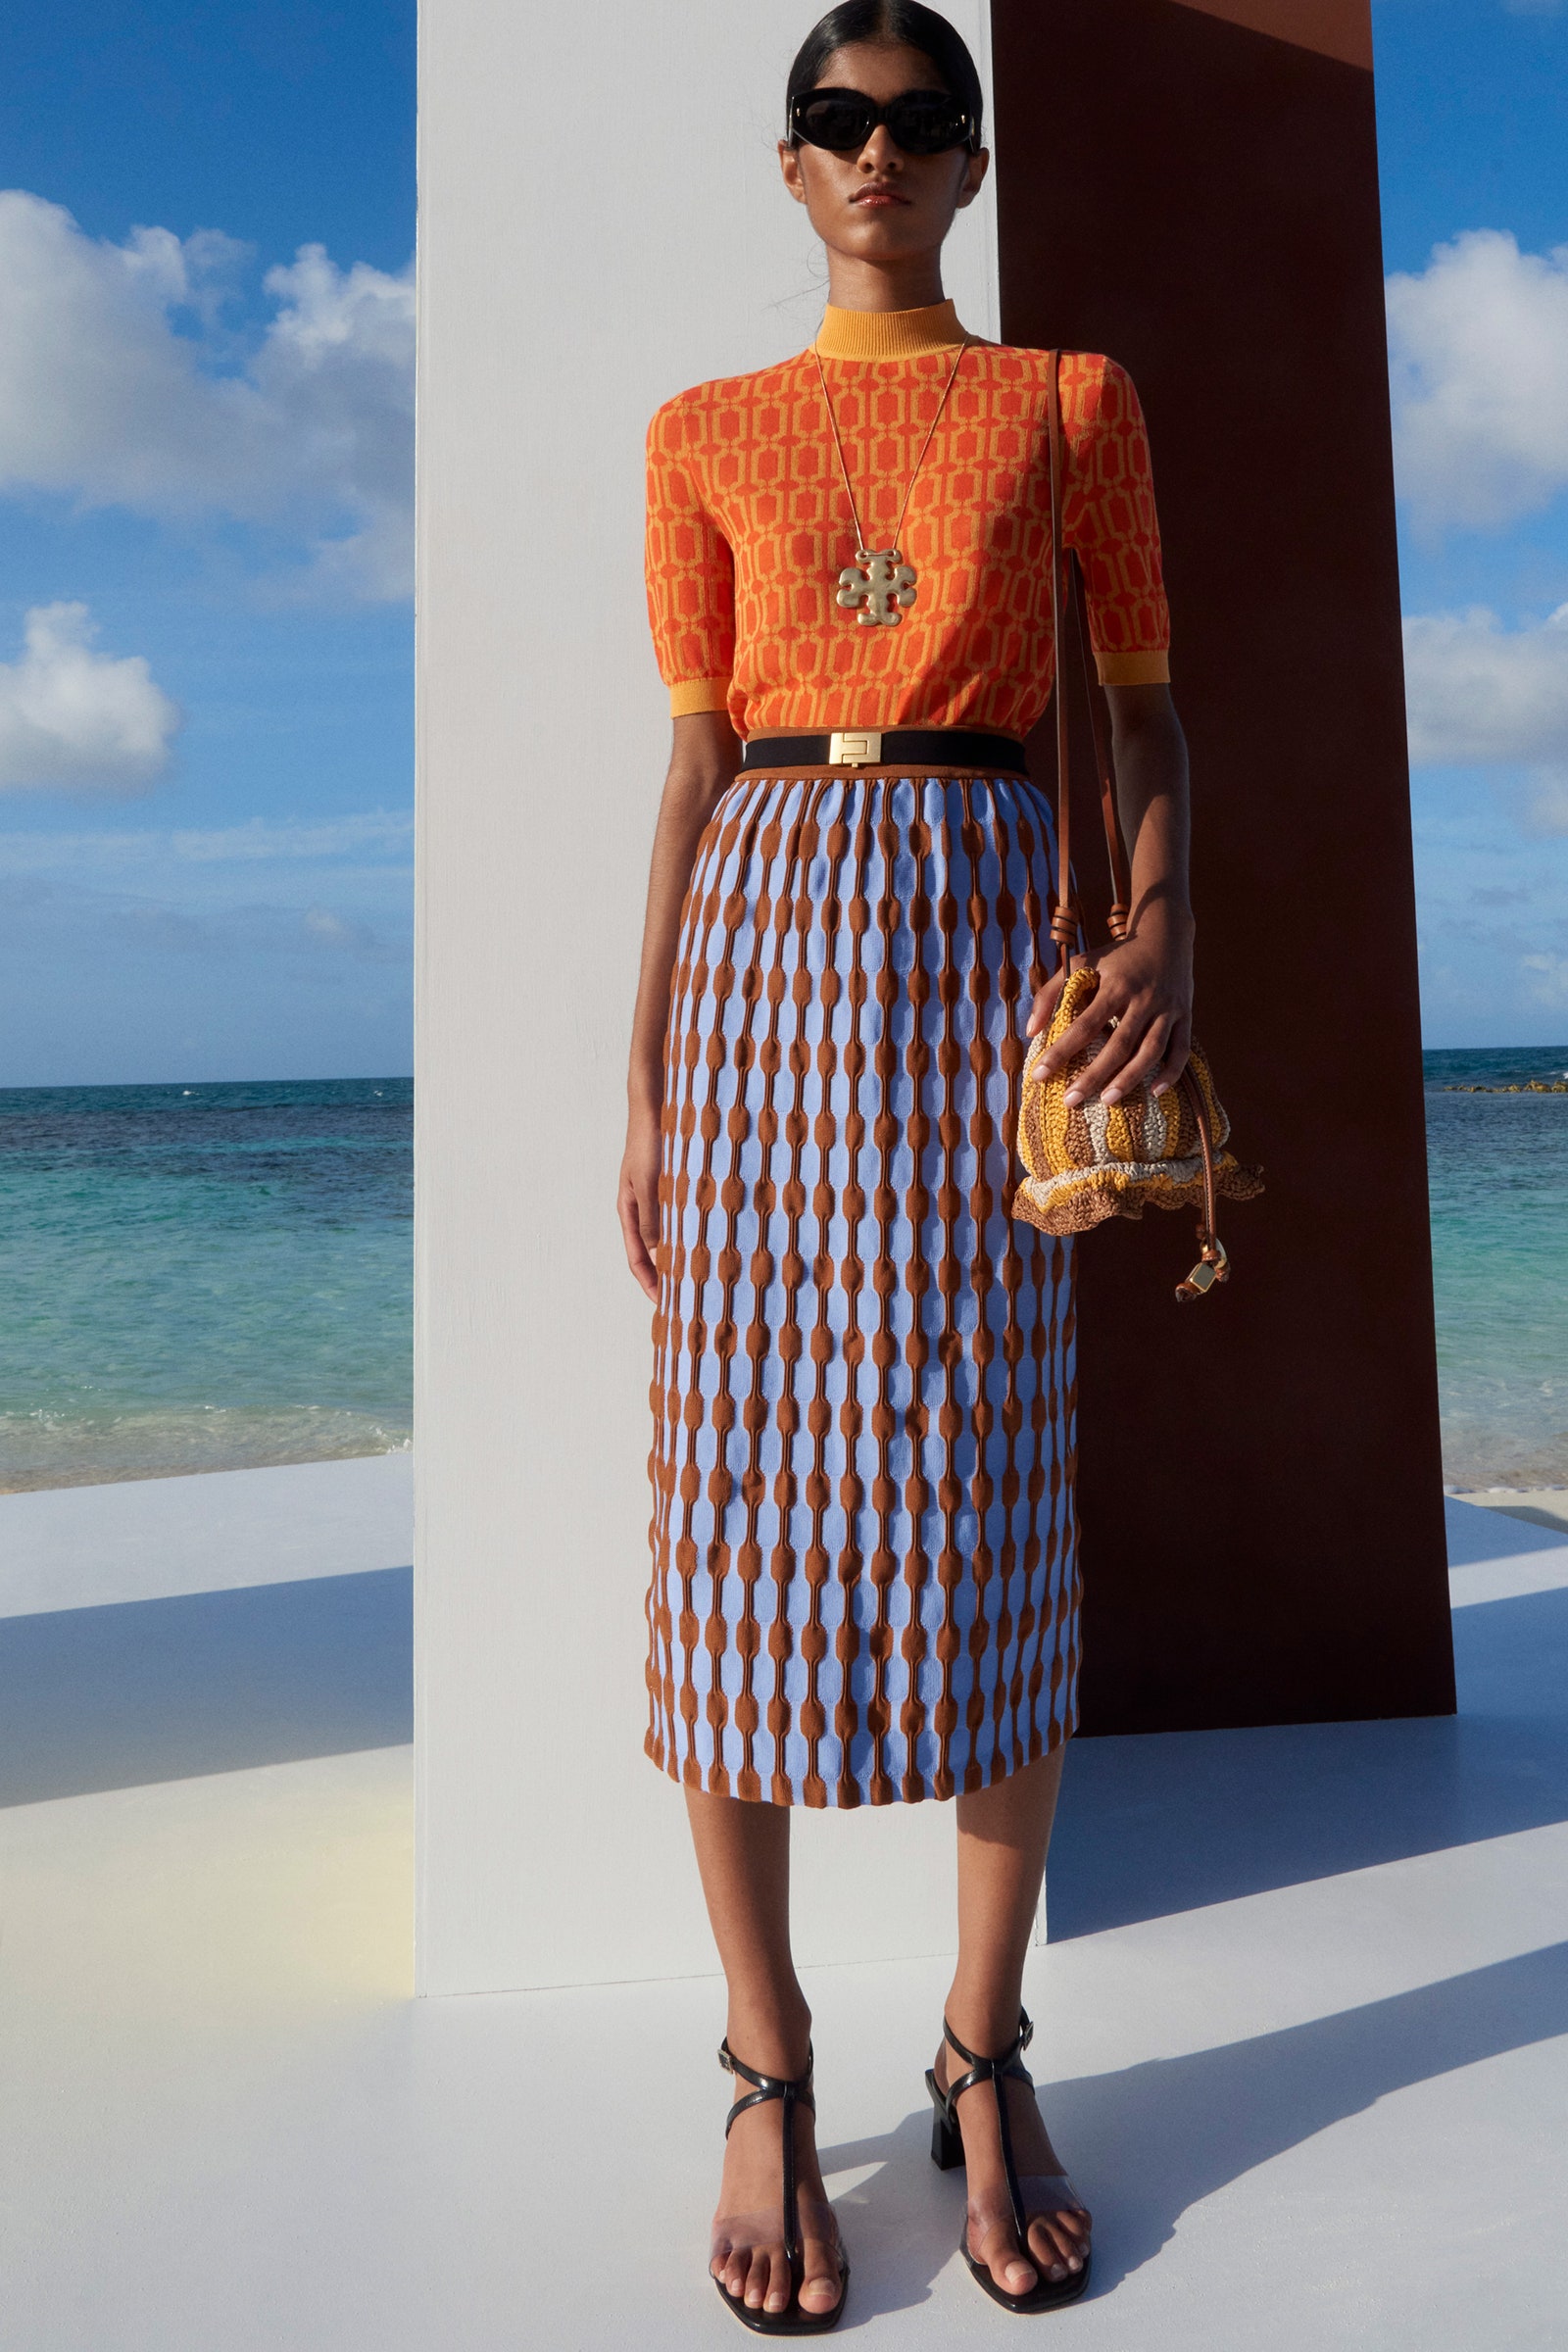 Tory Burch Pre-Fall 2022 Collection